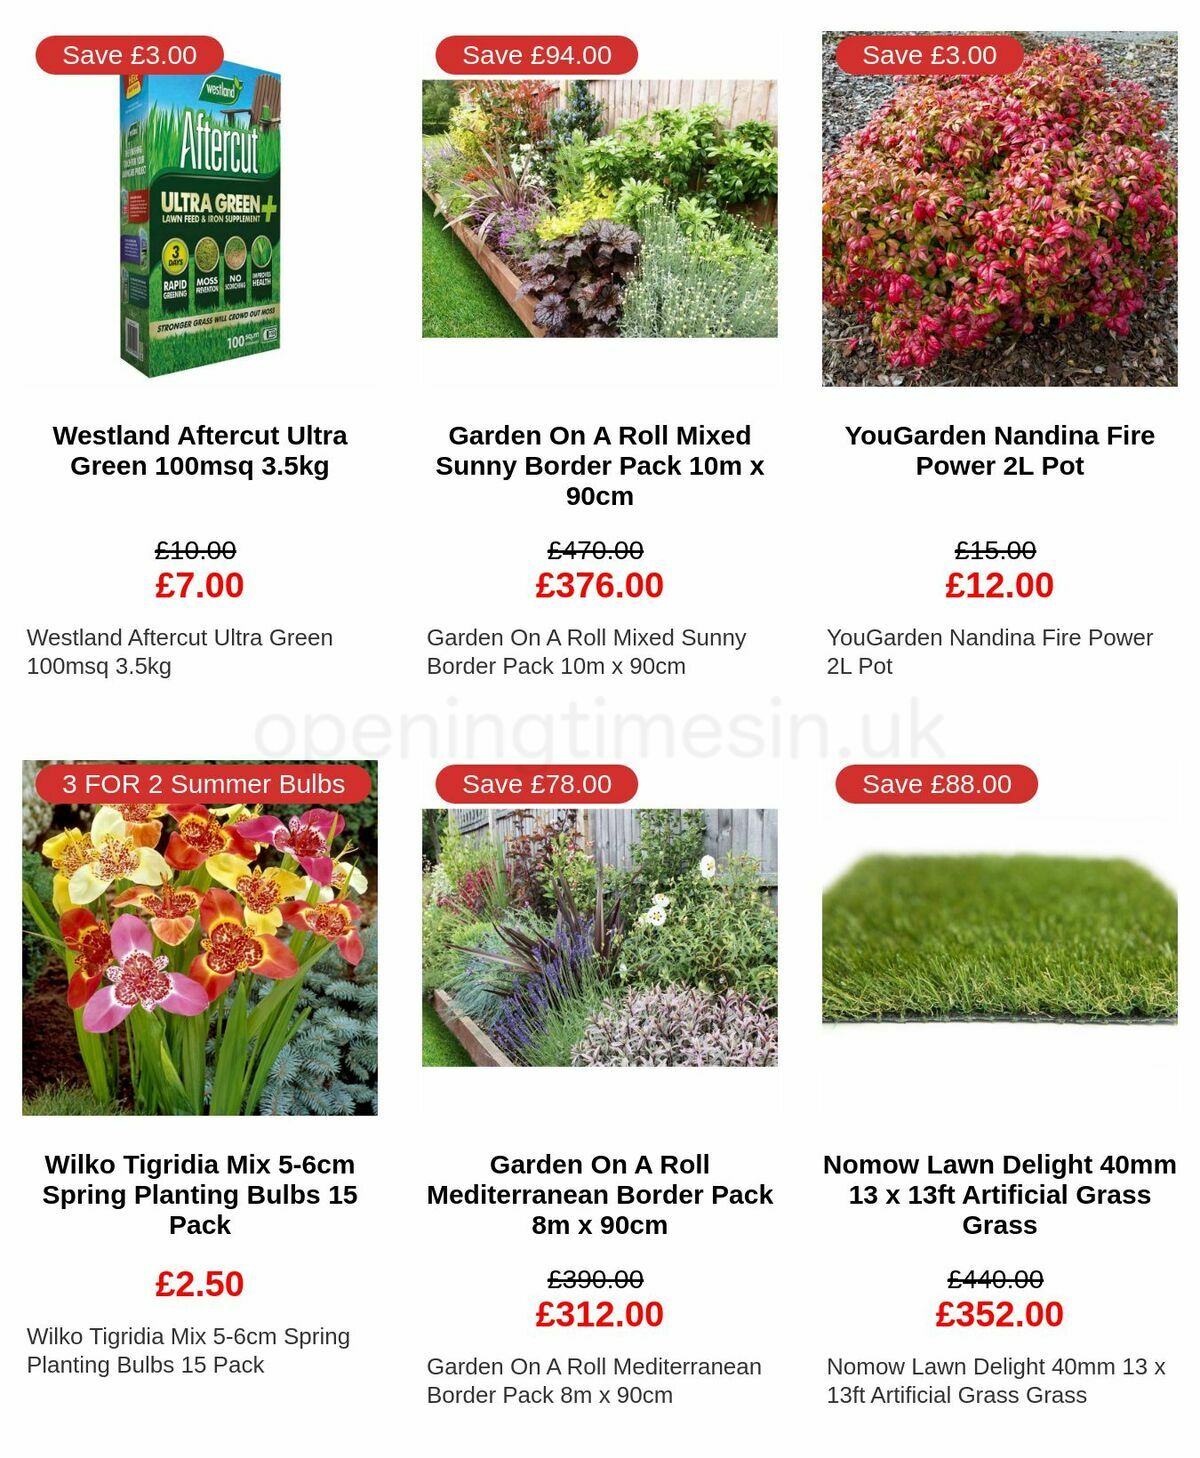 Wilko Offers from 11 April